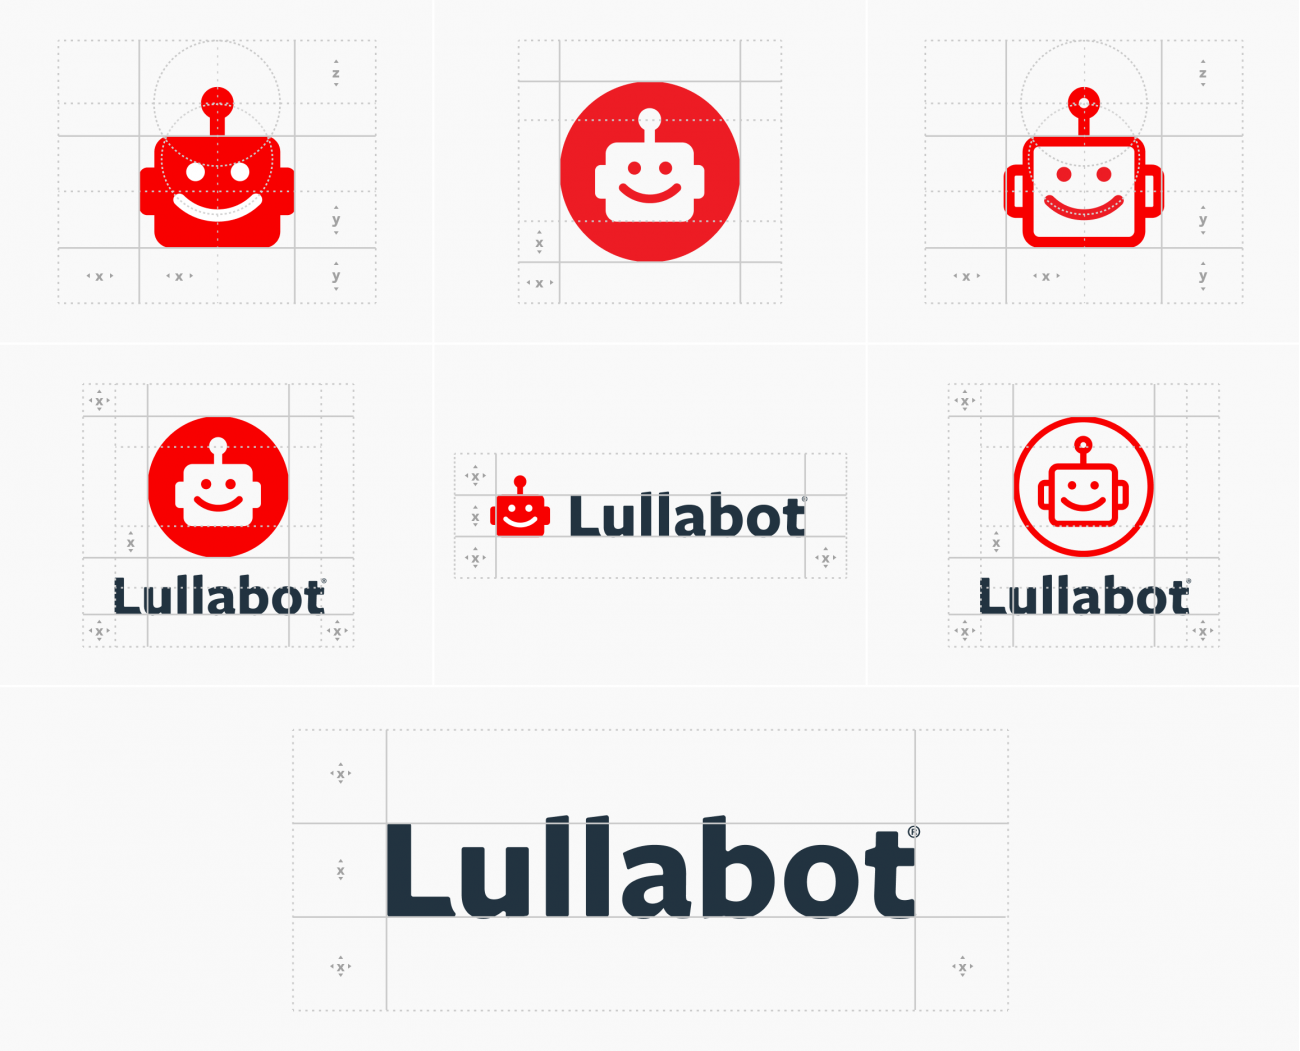 The Lullabot identity clear space rules